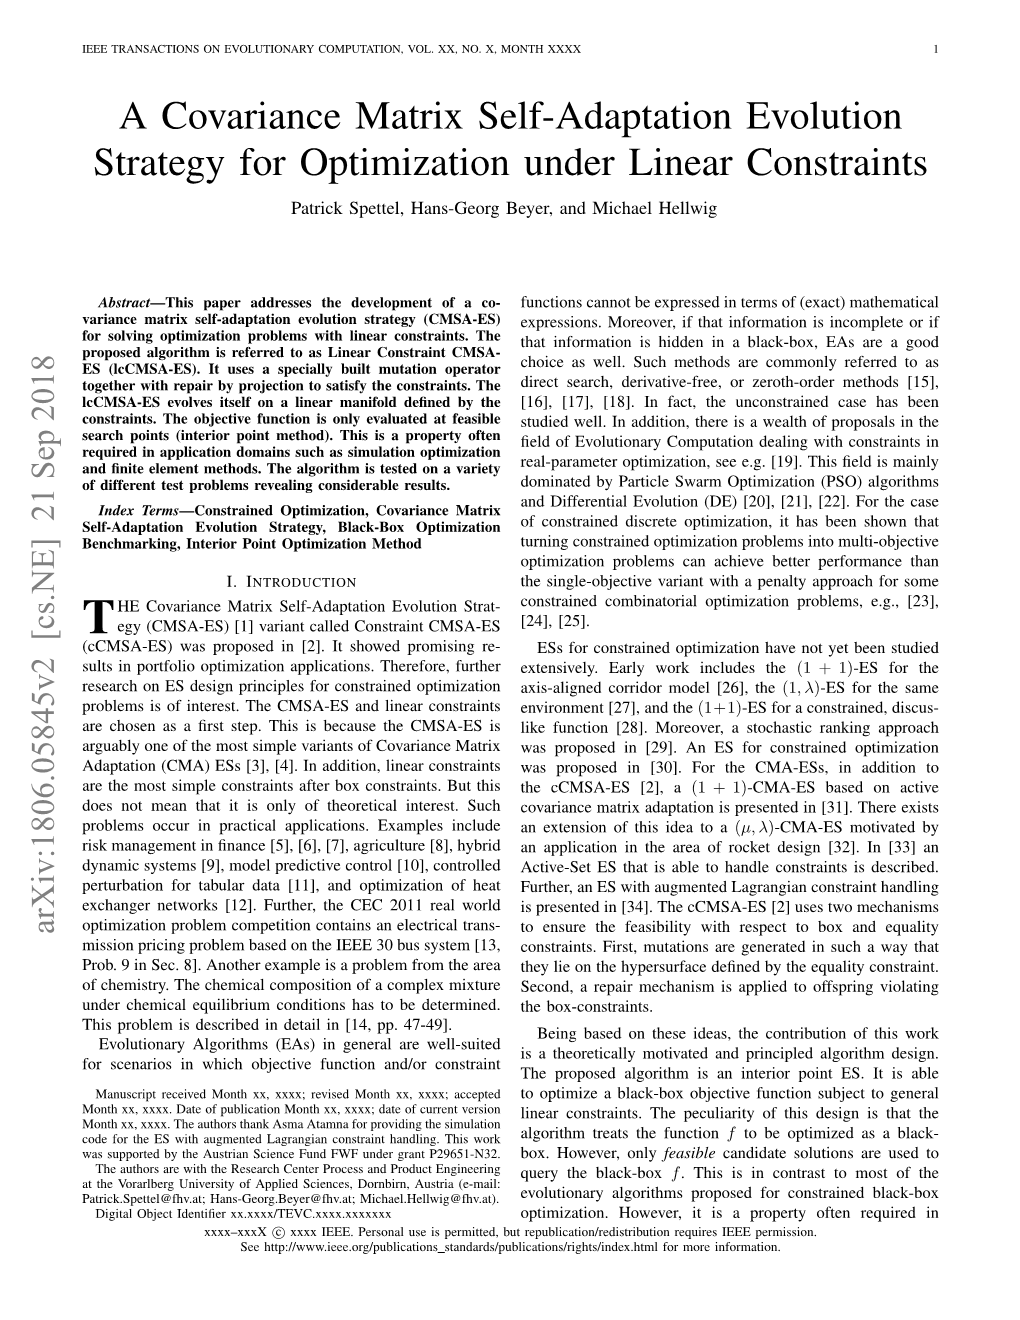 A Covariance Matrix Self-Adaptation Evolution Strategy for Optimization Under Linear Constraints Patrick Spettel, Hans-Georg Beyer, and Michael Hellwig